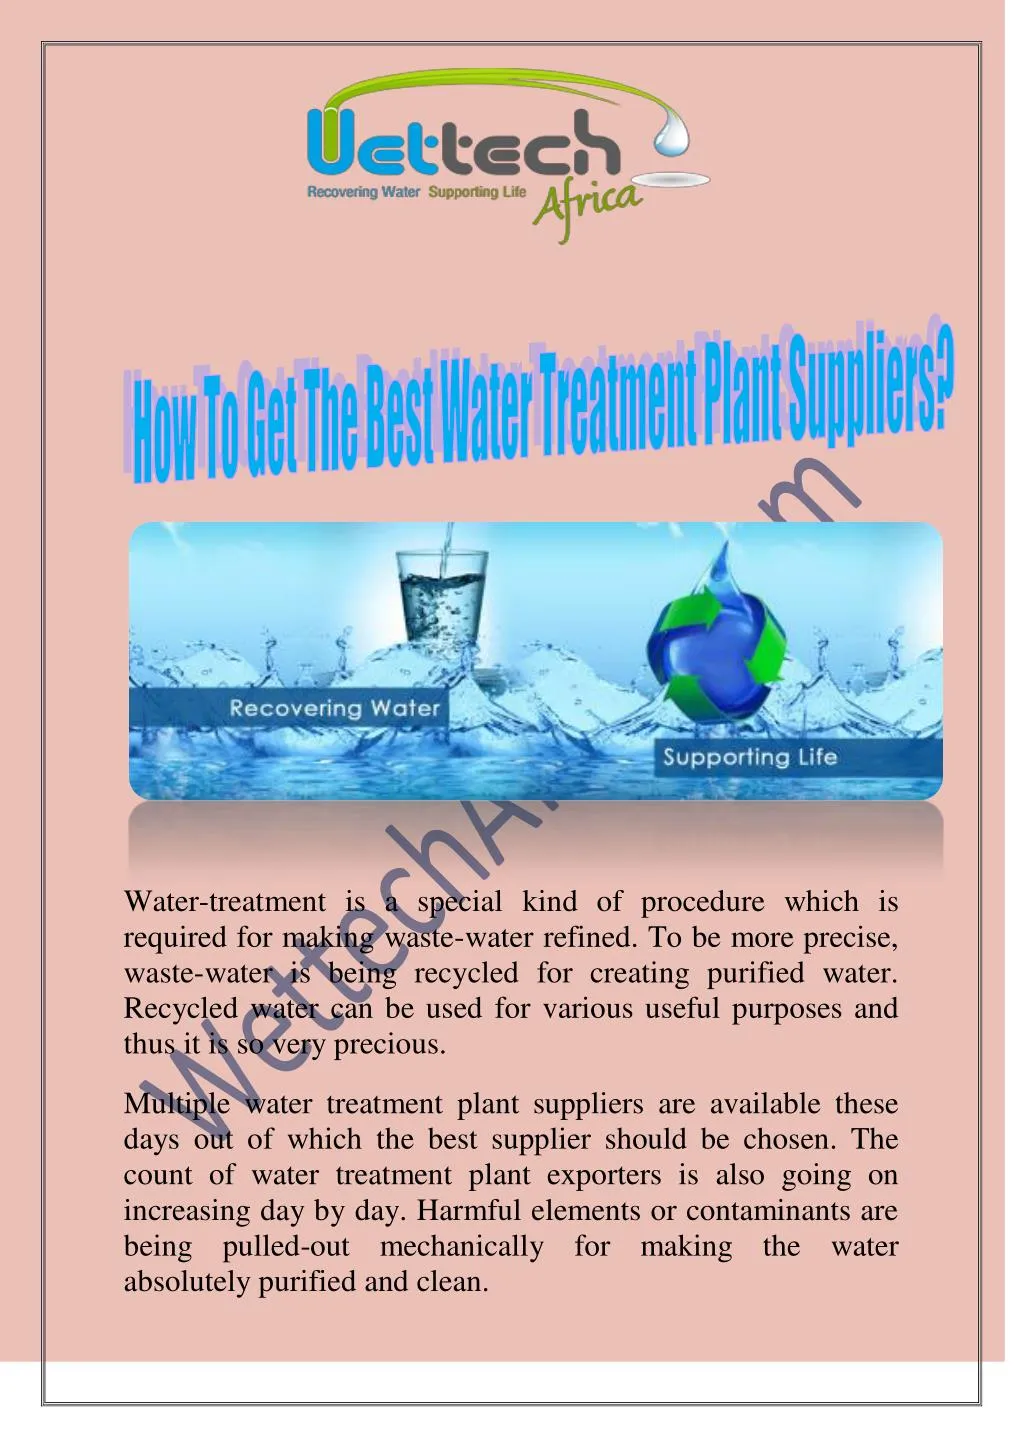 water treatment is a special kind of procedure